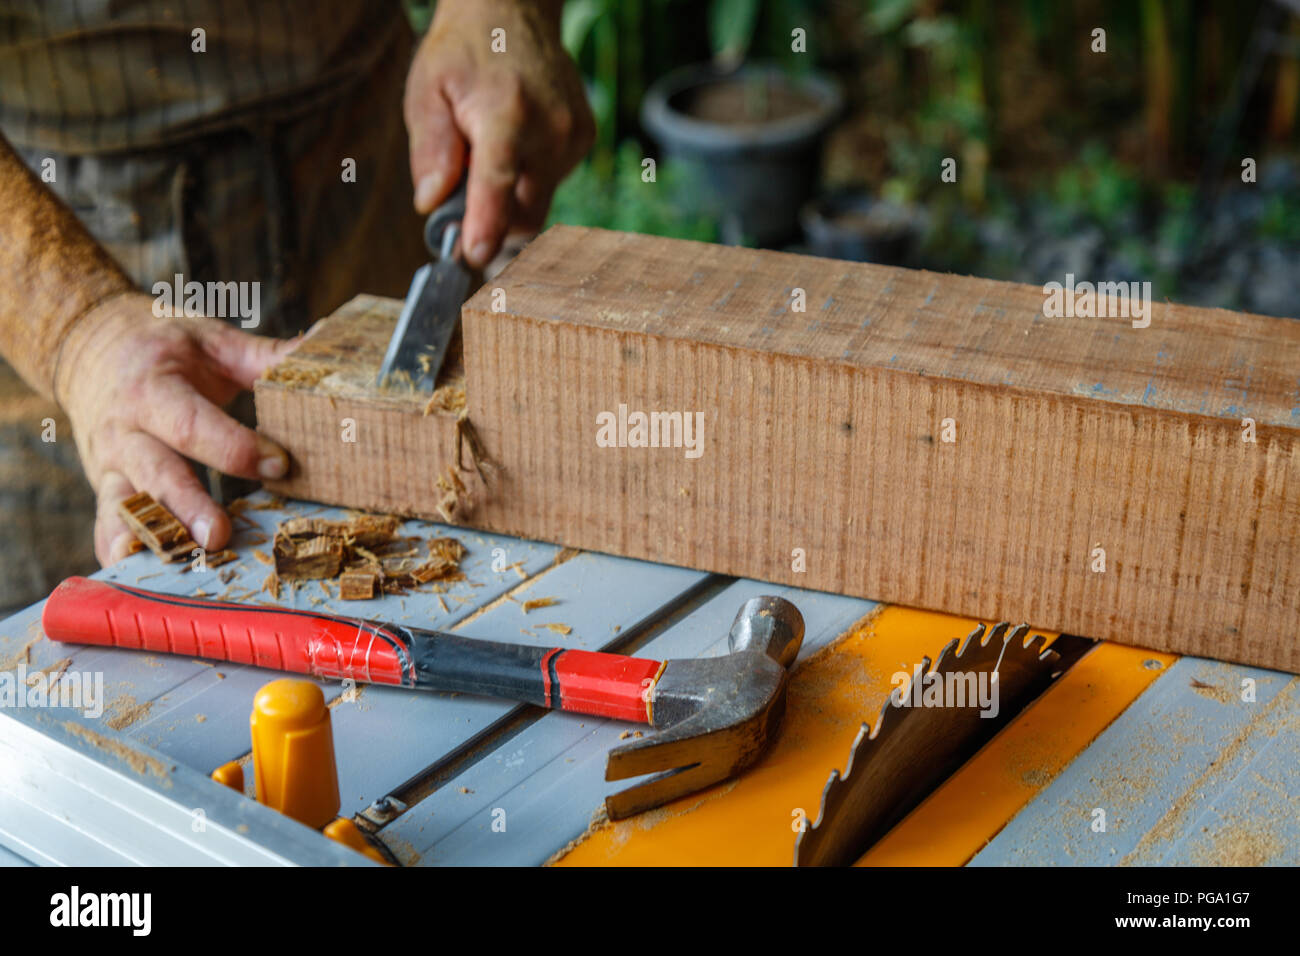 Man in apron chiseling wood with chisel on a table saw. Hammer laying on the table. Hands covered in saw dust. Carpentry tools, concept of wood work. Stock Photo